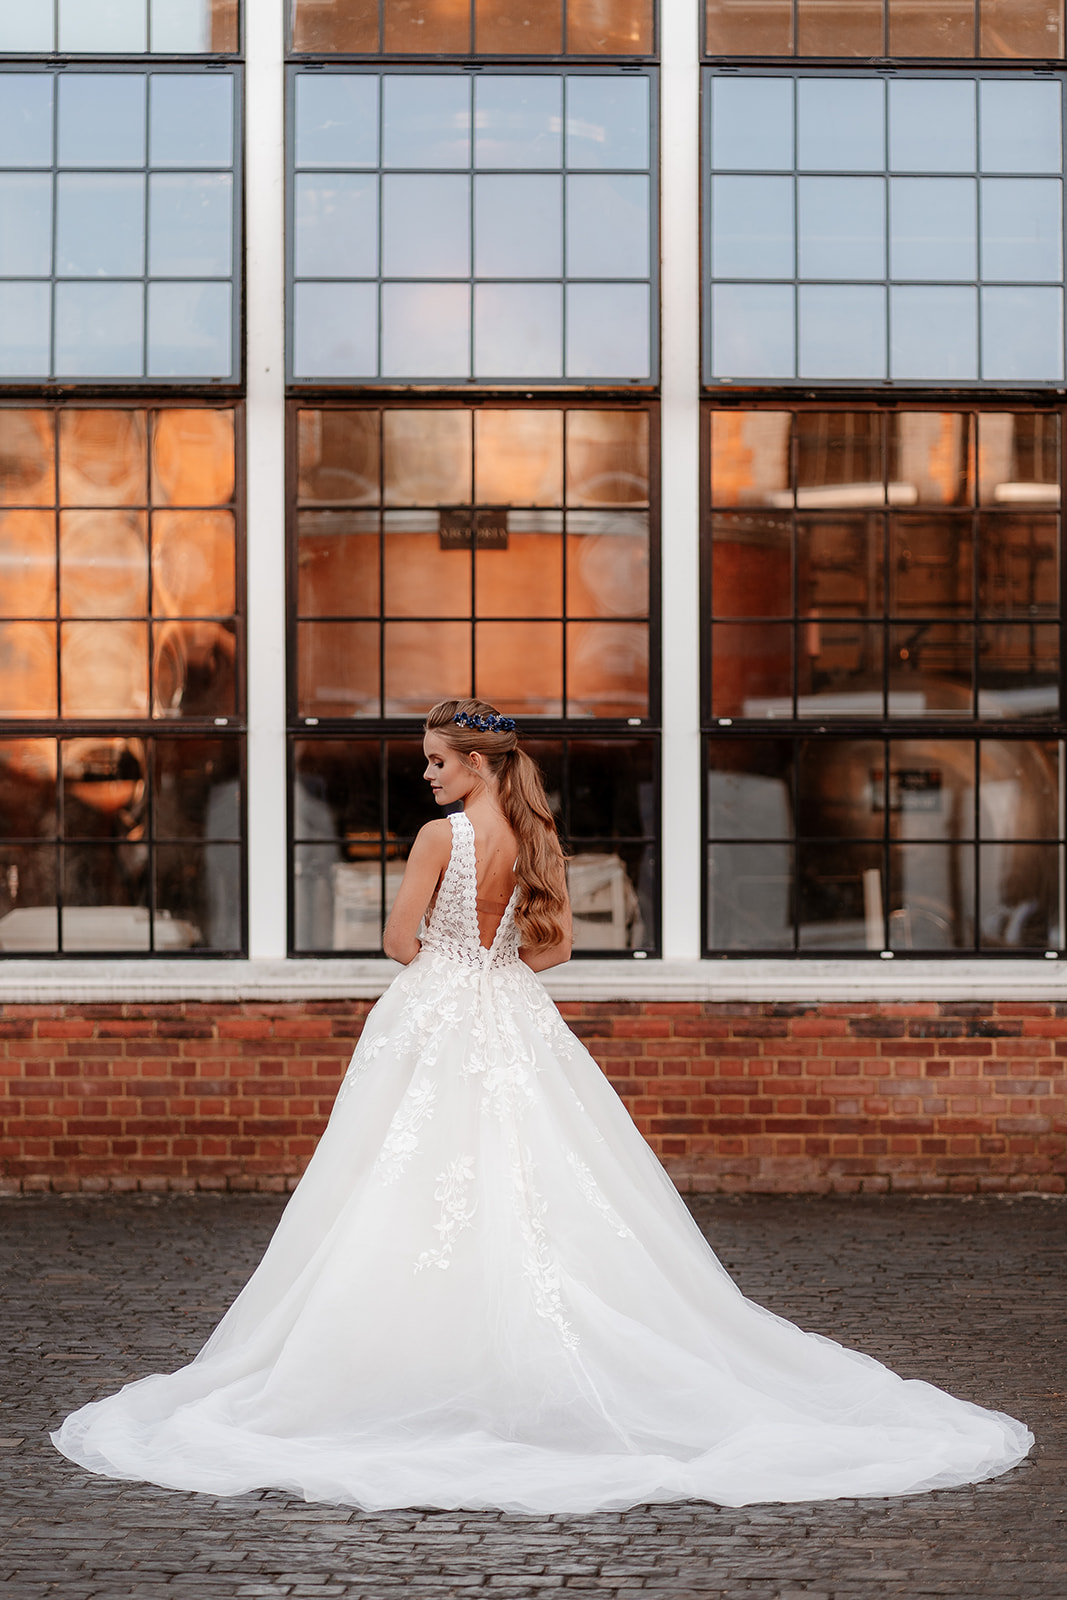 Bridal model in a white ballgown dress stands in front of tall industrial windows at the Bombay Sapphire Distillery. 